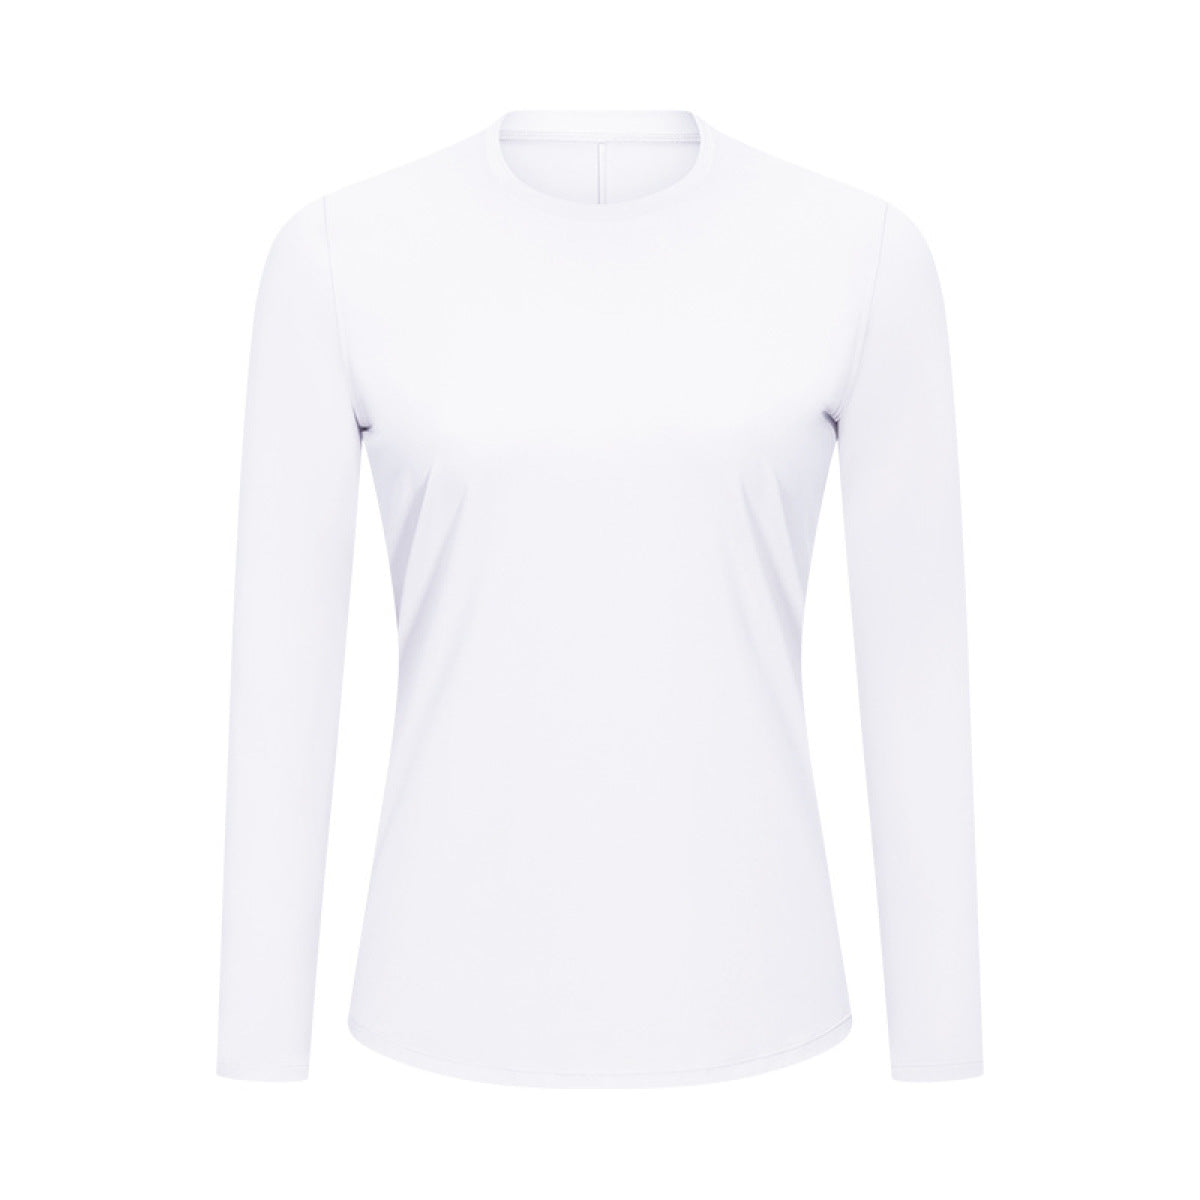 Long-Sleeved T-Shirt Quick-Drying Round Neck Active Tops